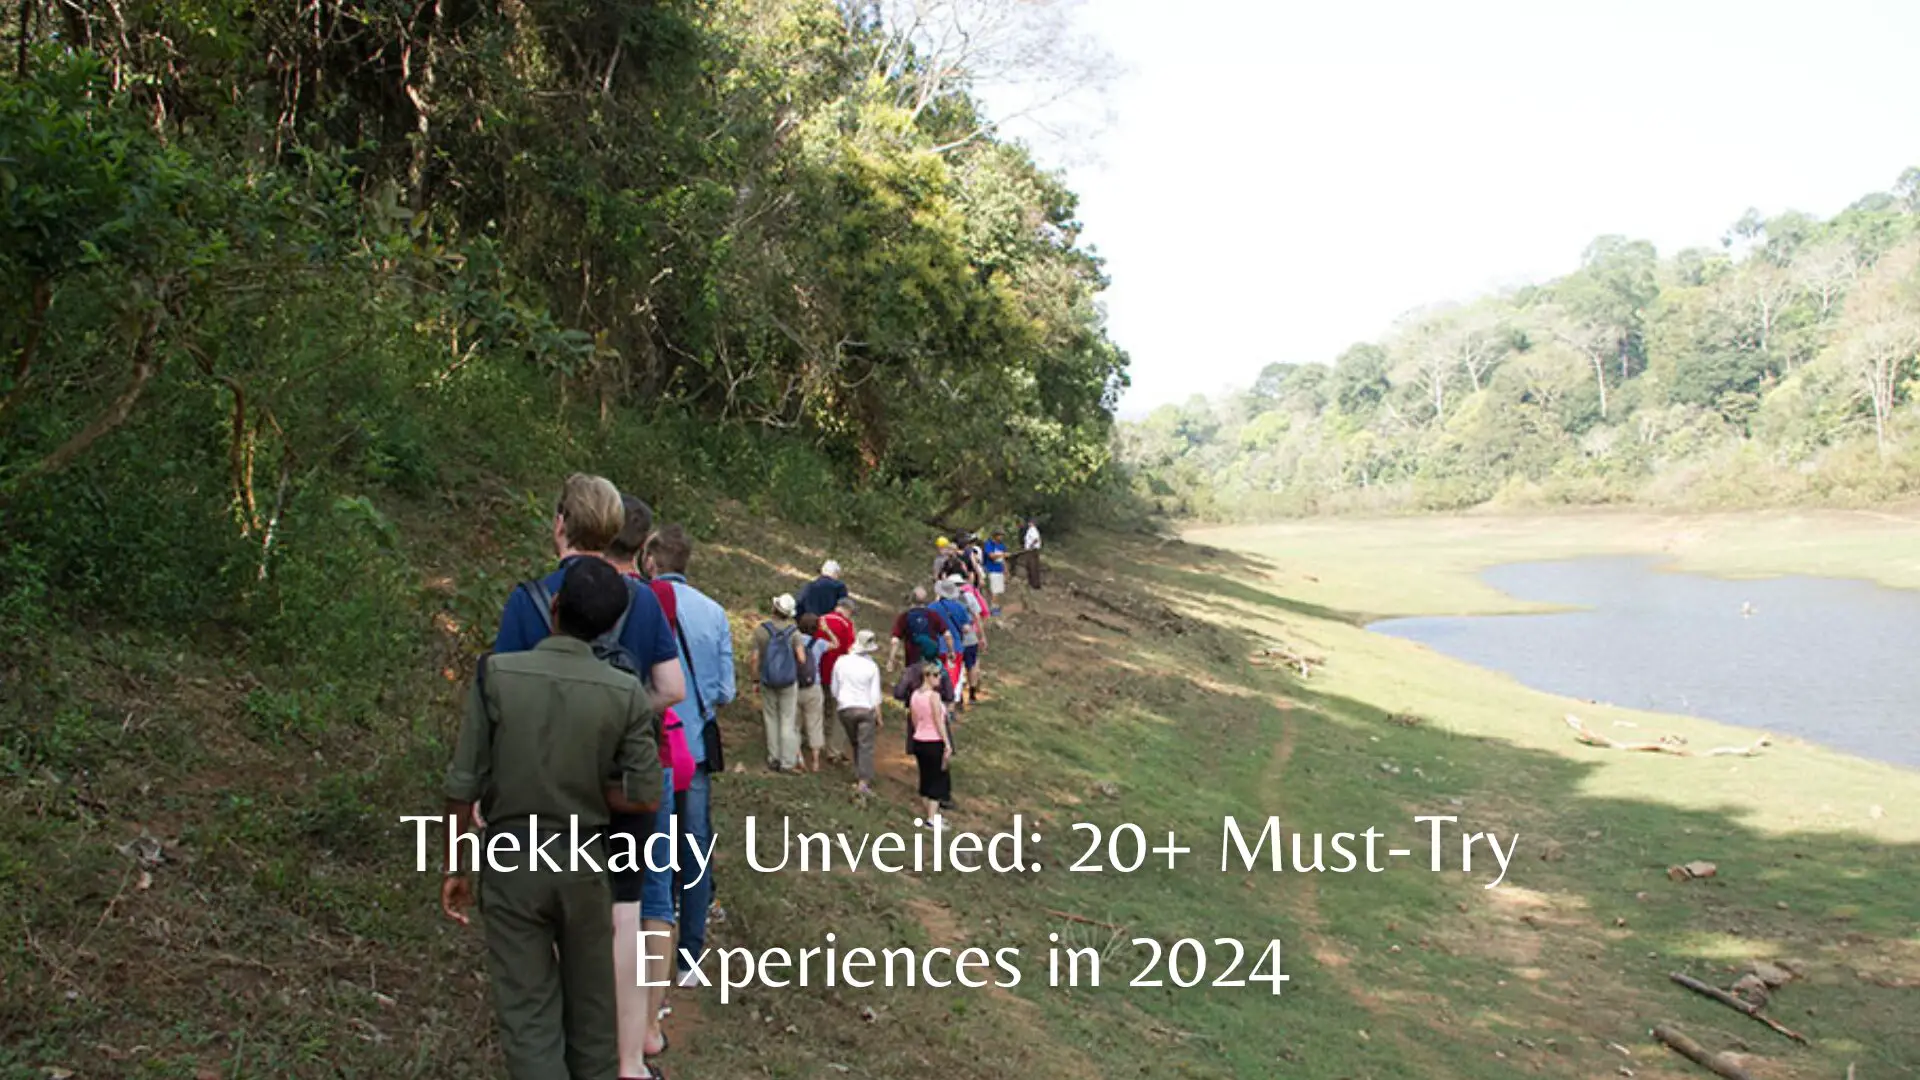 Thekkady Unveiled: 20+ Must-Try Experiences in 2024